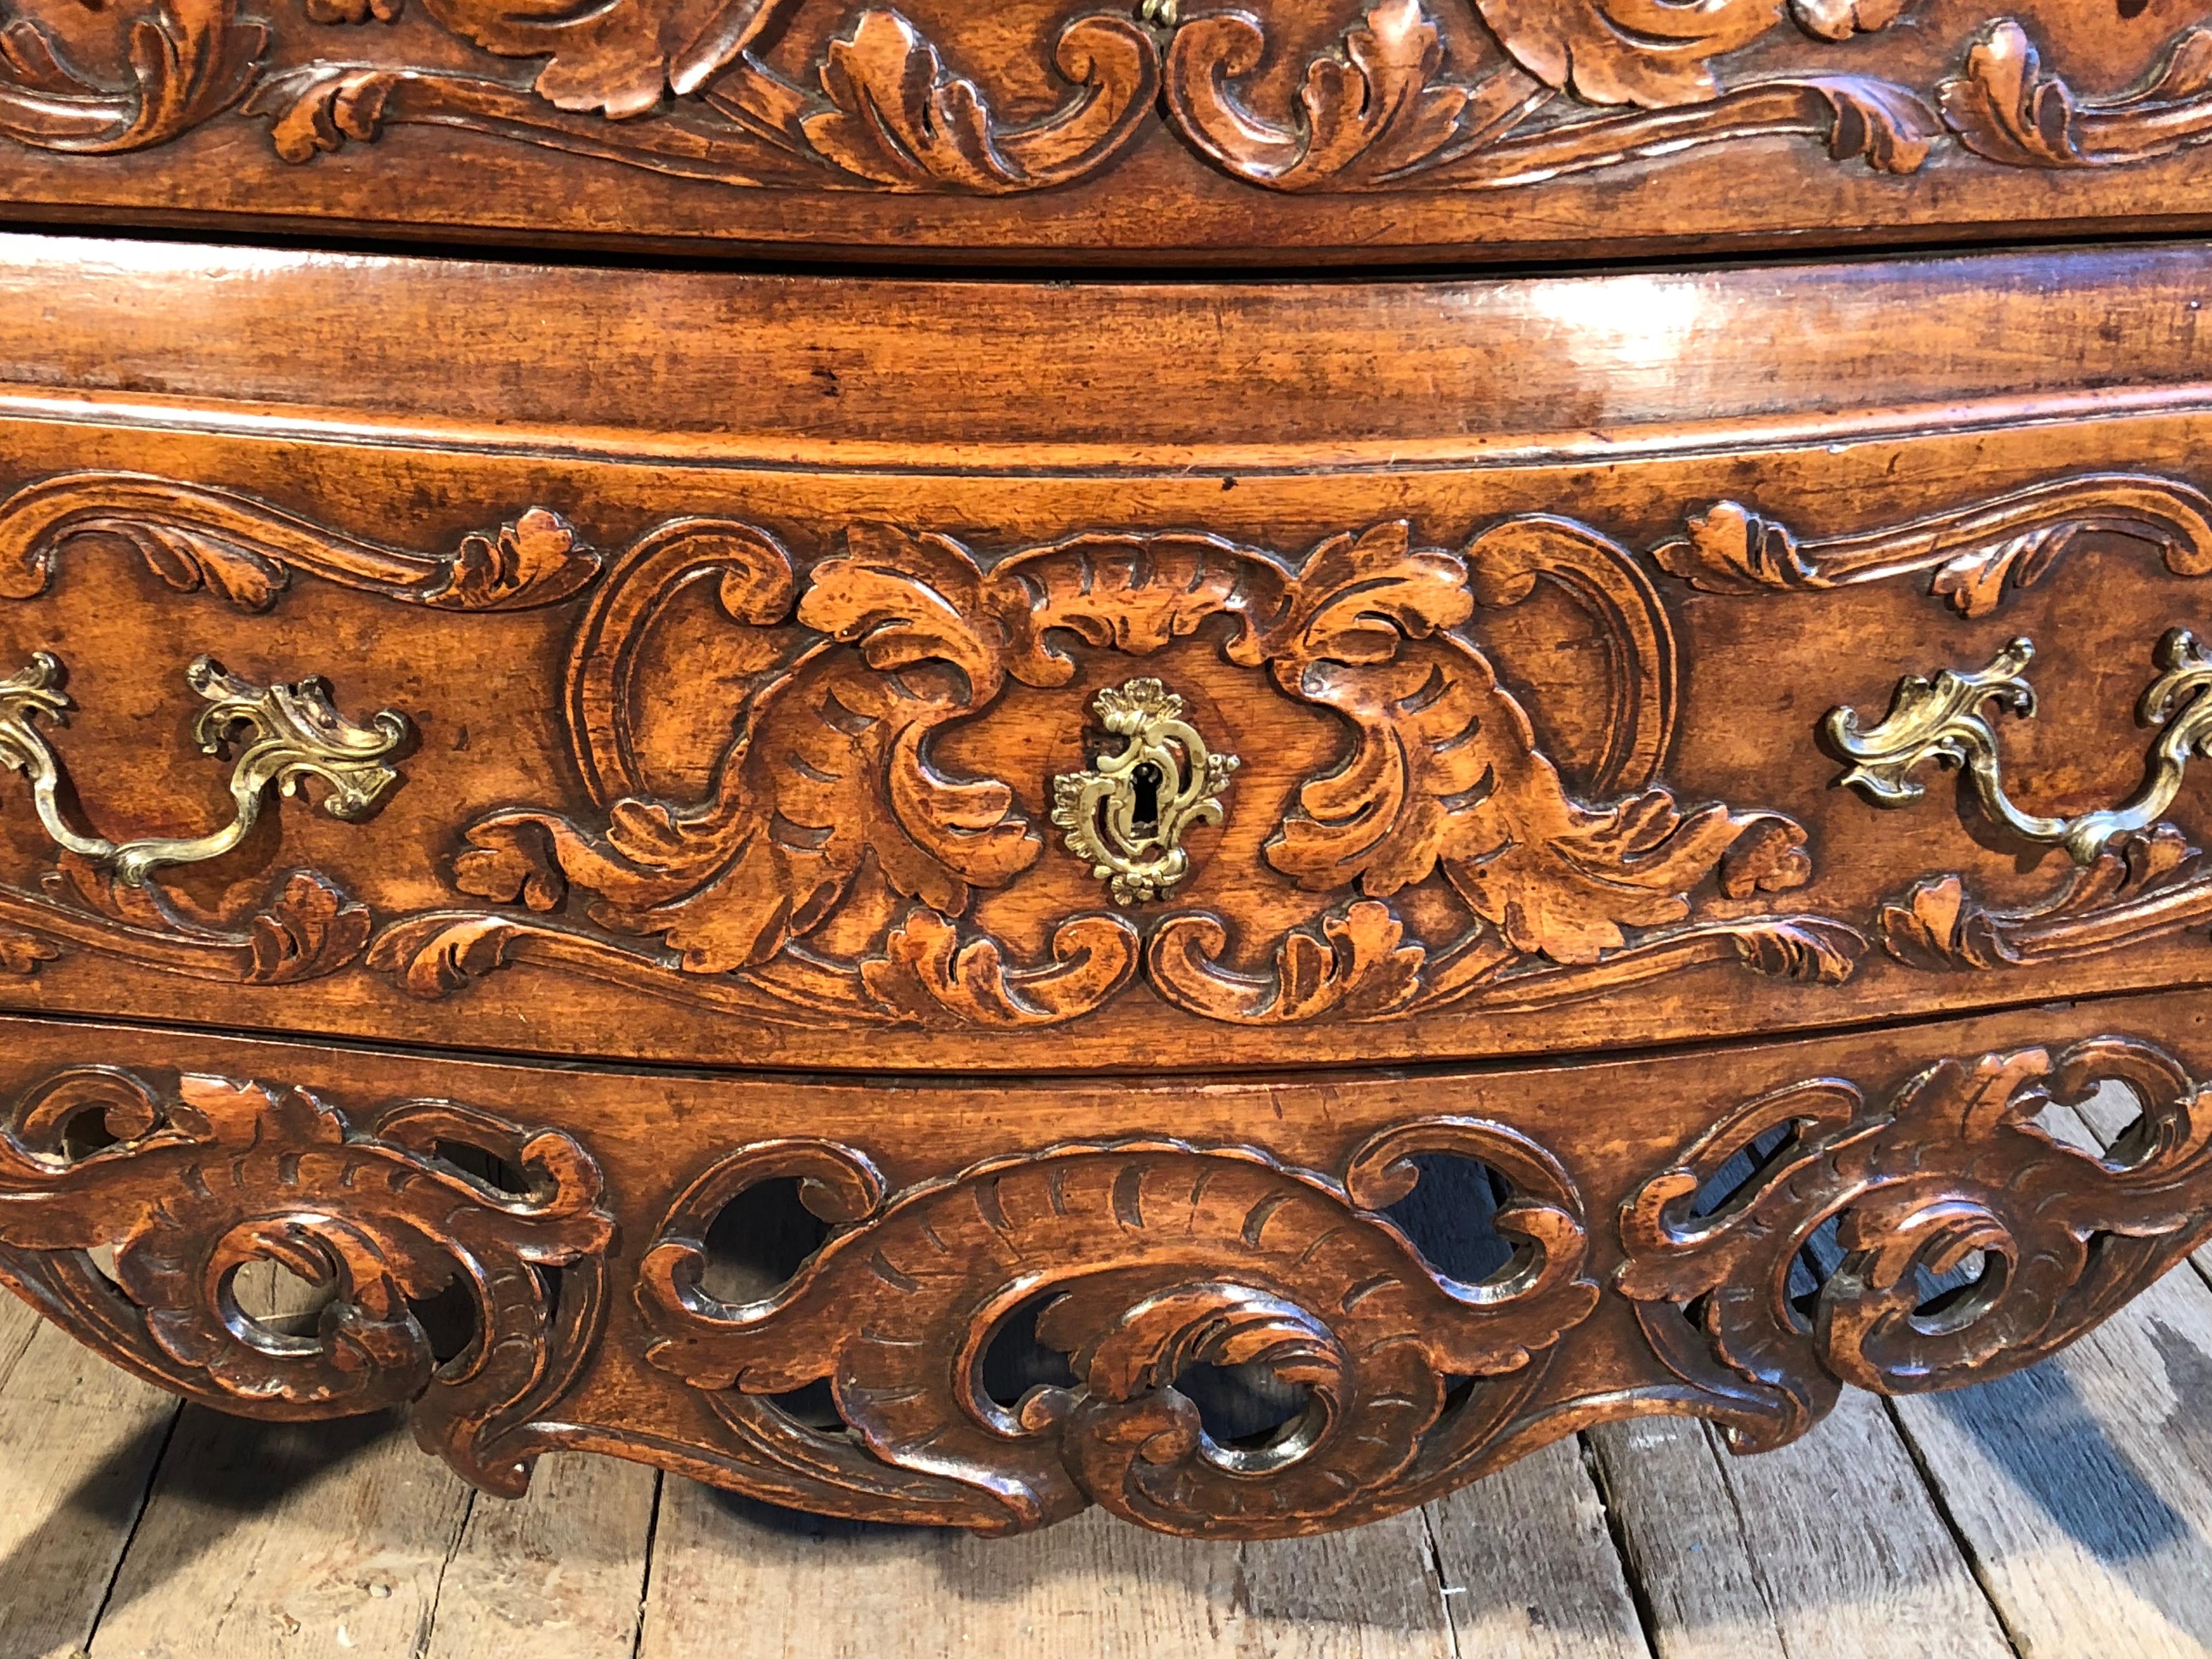 An important Louis XV period commode circa 1750 from Arles, in walnut, the case in a slight bombe form, with two drawers, ornately carved retaining its original brass drawer pulls. Commodes from this region and period are considered the pinnacle of